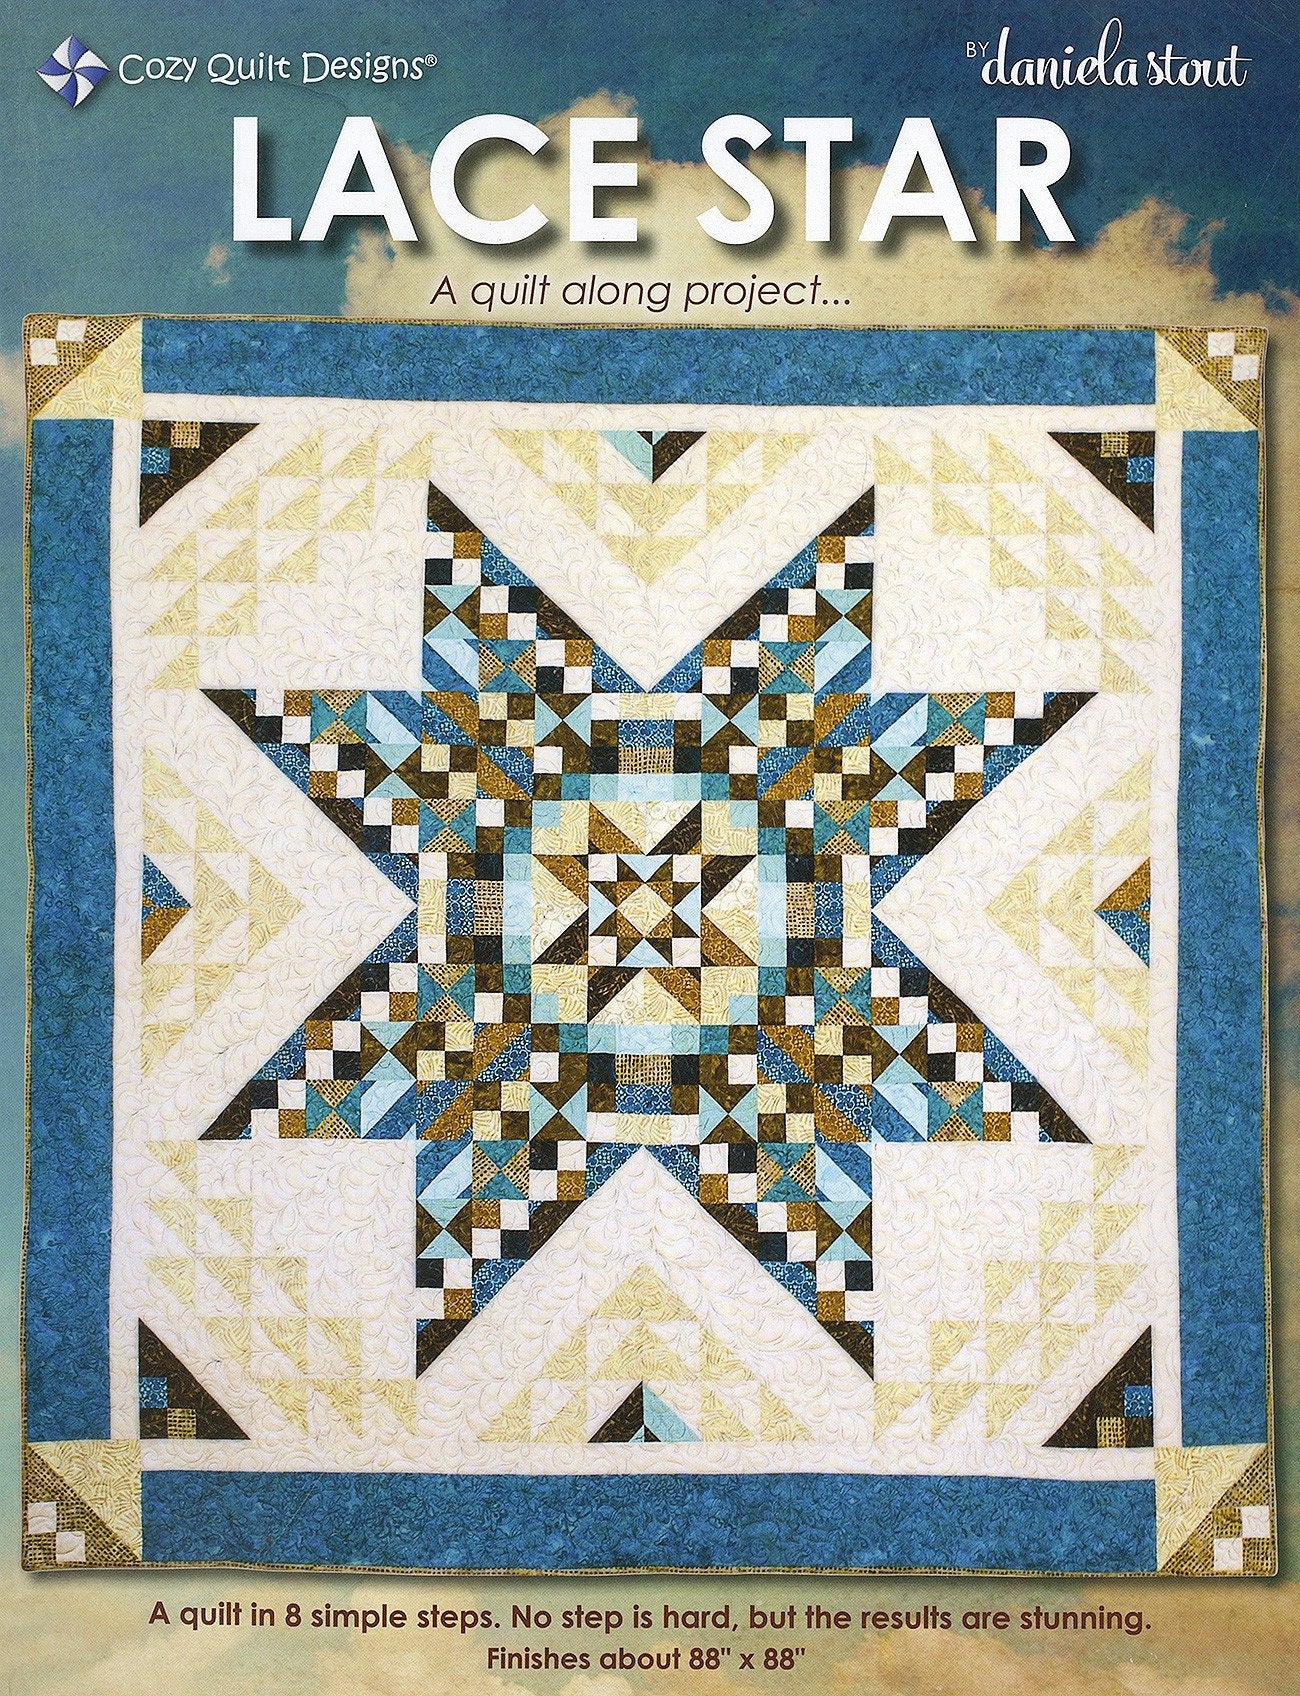 Lace Star Quilt Pattern Book by Daniela Stout of Cozy Quilt Designs